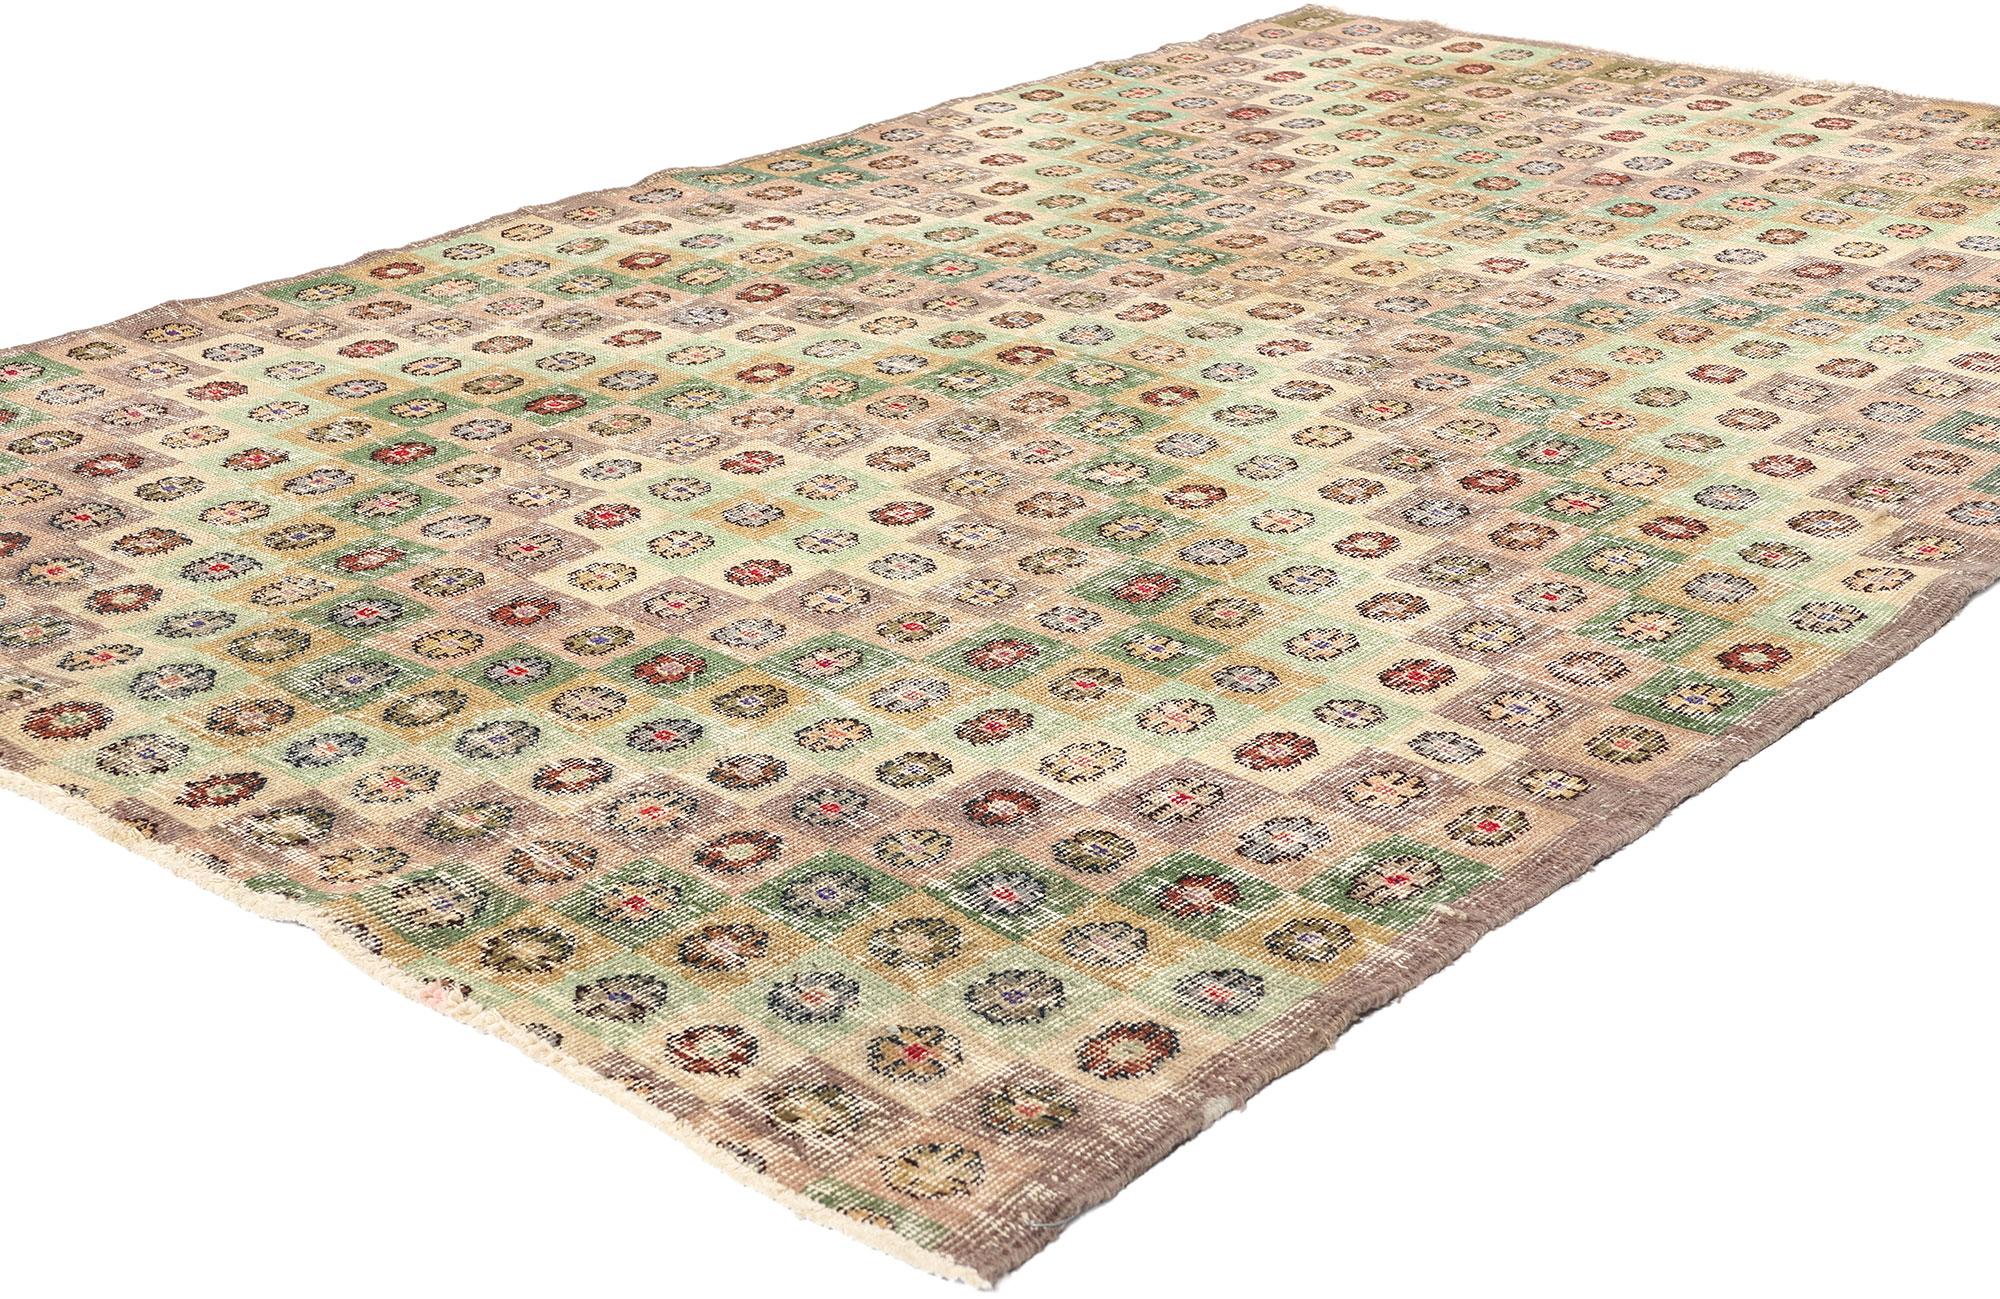 51998 Zeki Muren Vintage Turkish Sivas Rug, 05'03 x 07'09. Nestled amidst the tranquil landscapes of Turkey's Sivas region, Zeki Muren Turkish Sivas rugs pay tribute to the esteemed Turkish singer who inspired their name. Celebrated for their